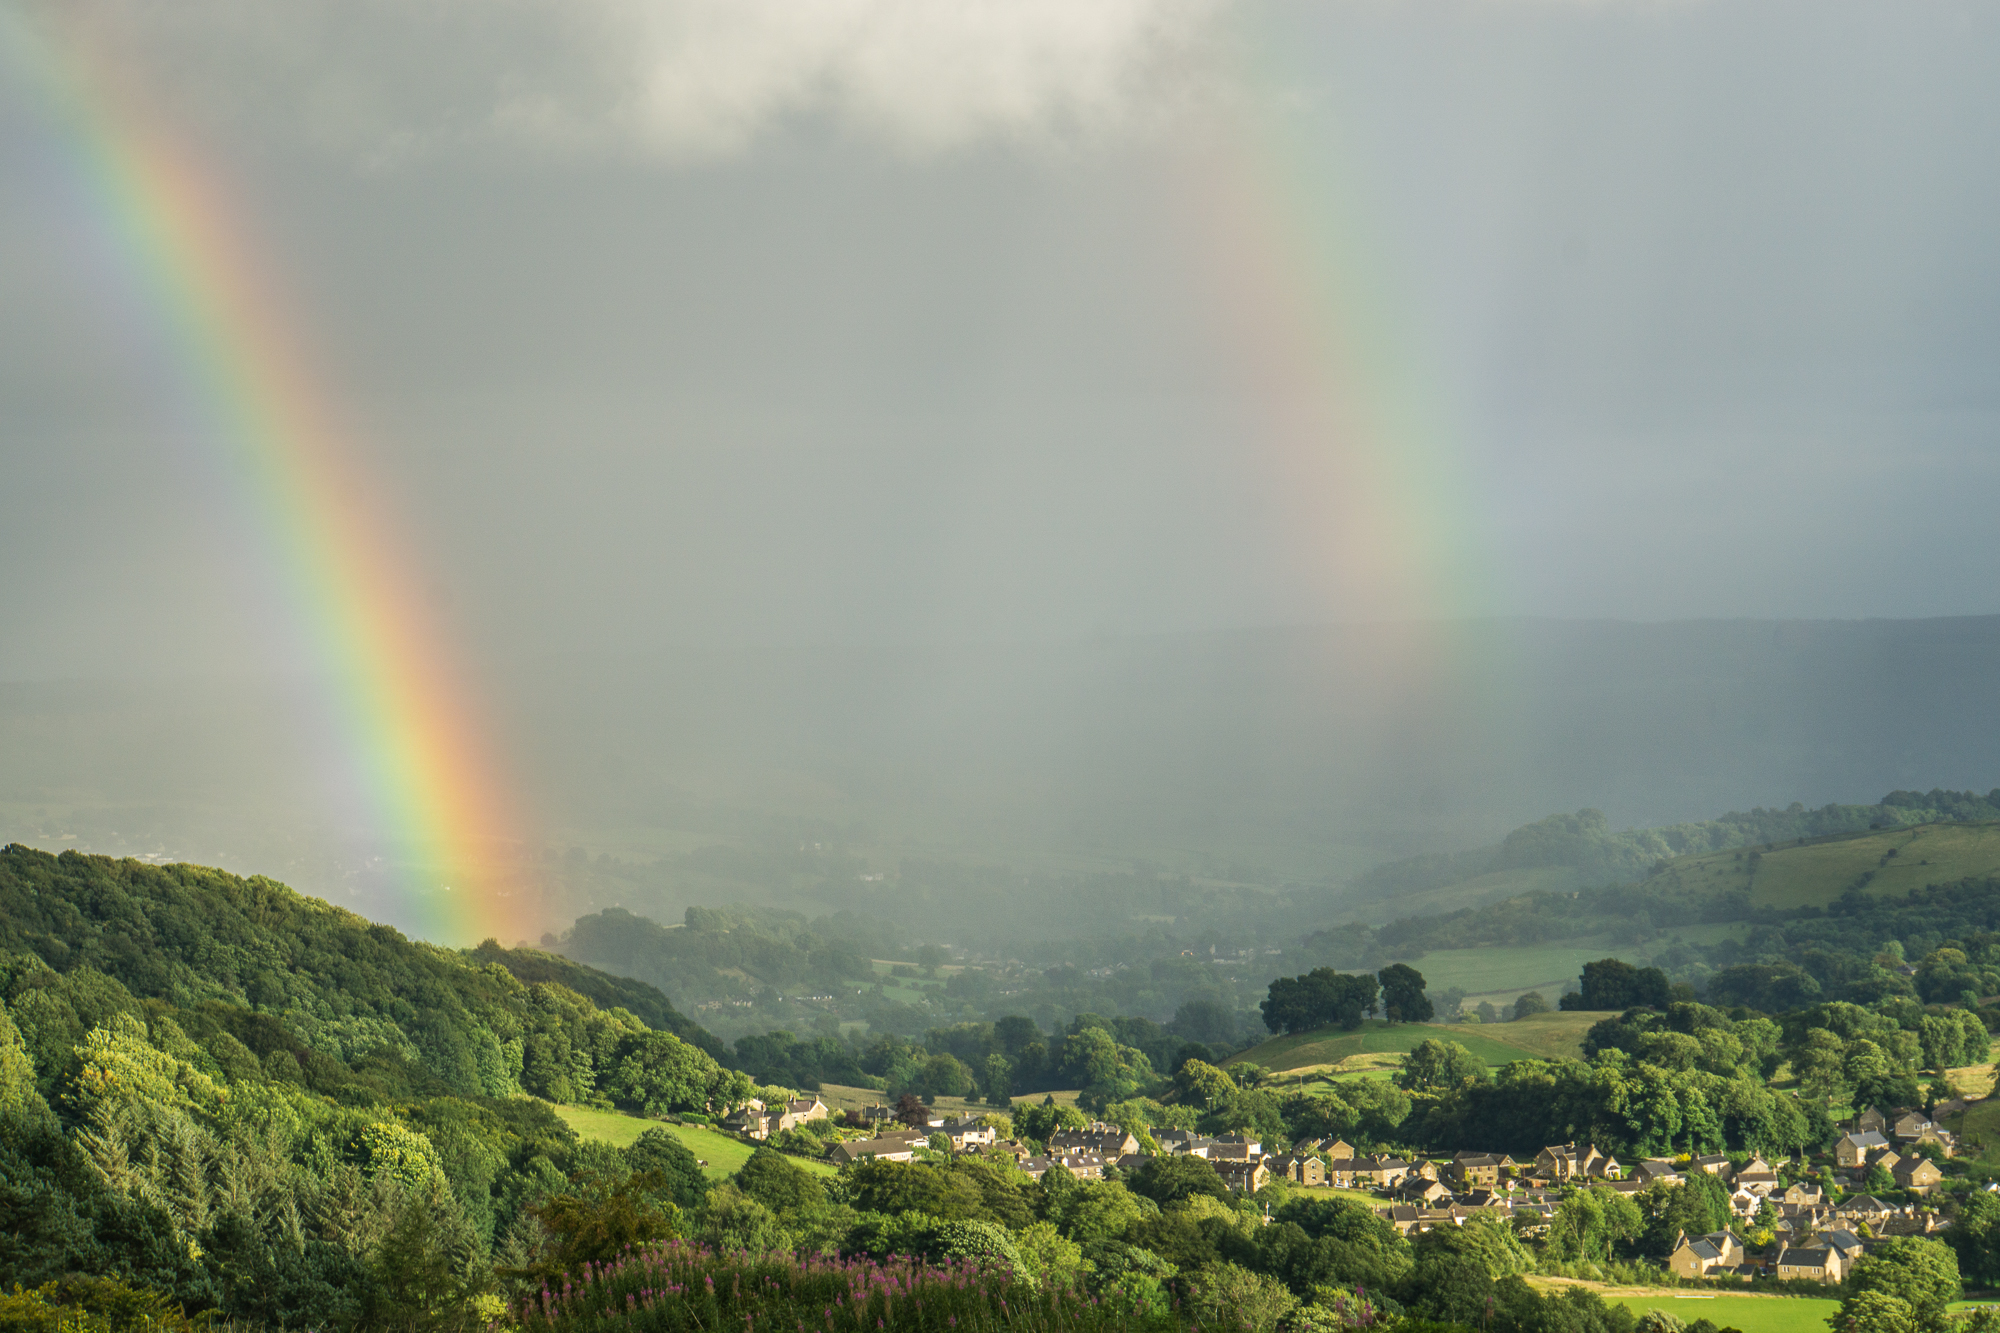 Double rainbow over the village of Eyam, Peak District